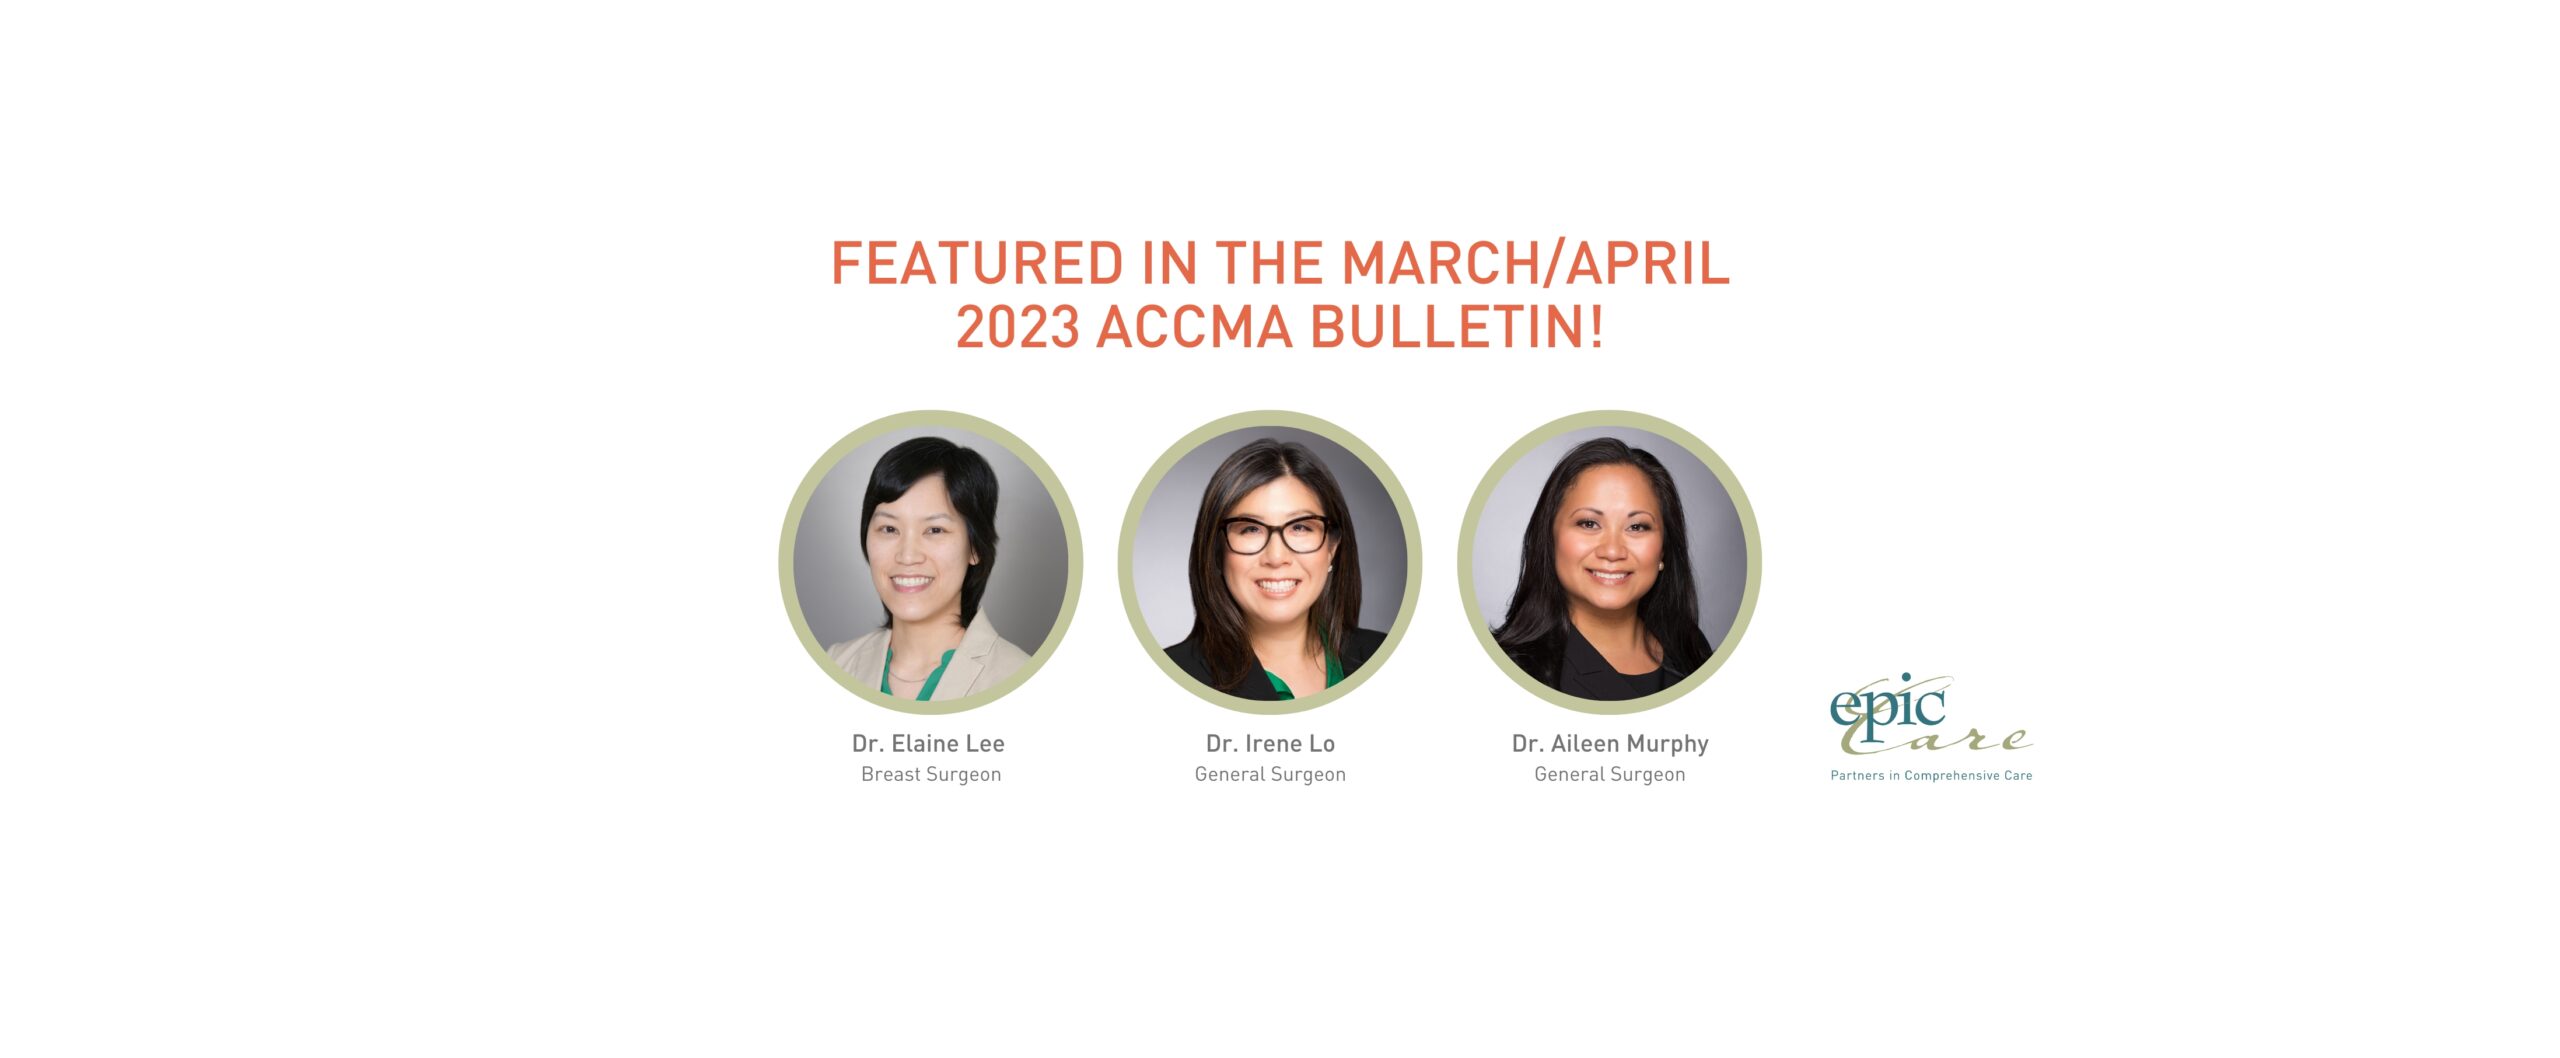 Epic Care Drs. Elaine Lee, Irene Lo, and Aileen Murphy featured in Alameda-Contra Costa Medical Association (ACCMA) March/April 2023 Bulletin